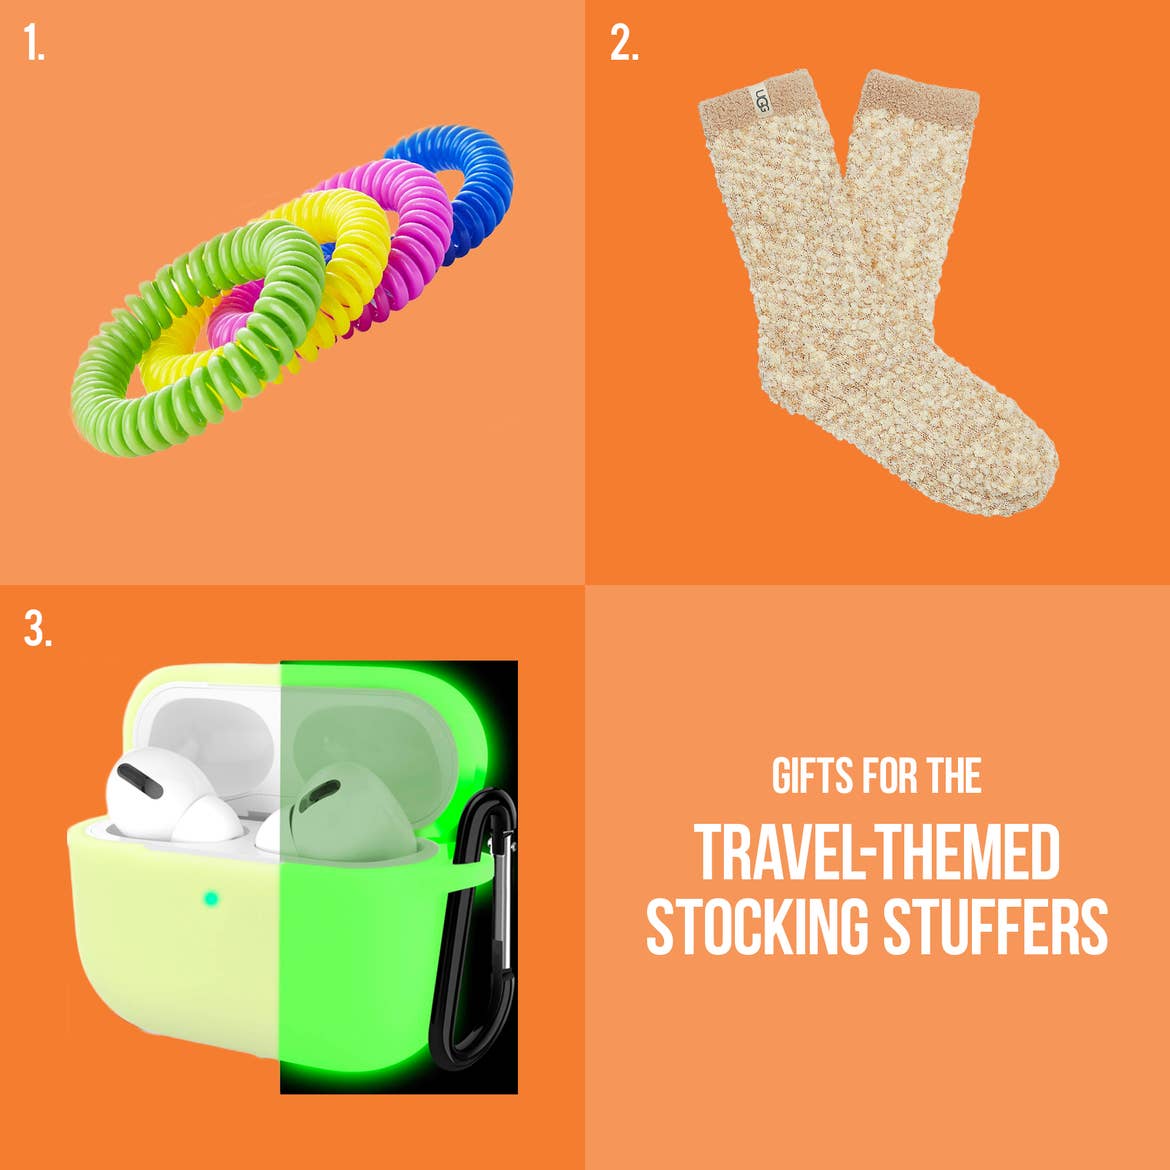 Several multi-colored wristbands, a pair of fuzzy socks, and a glow-in-the-dark air-pod case image are placed on top of an orange graphic that reads, 'Gifts for the Travel-themed Stocking Stuffers.'